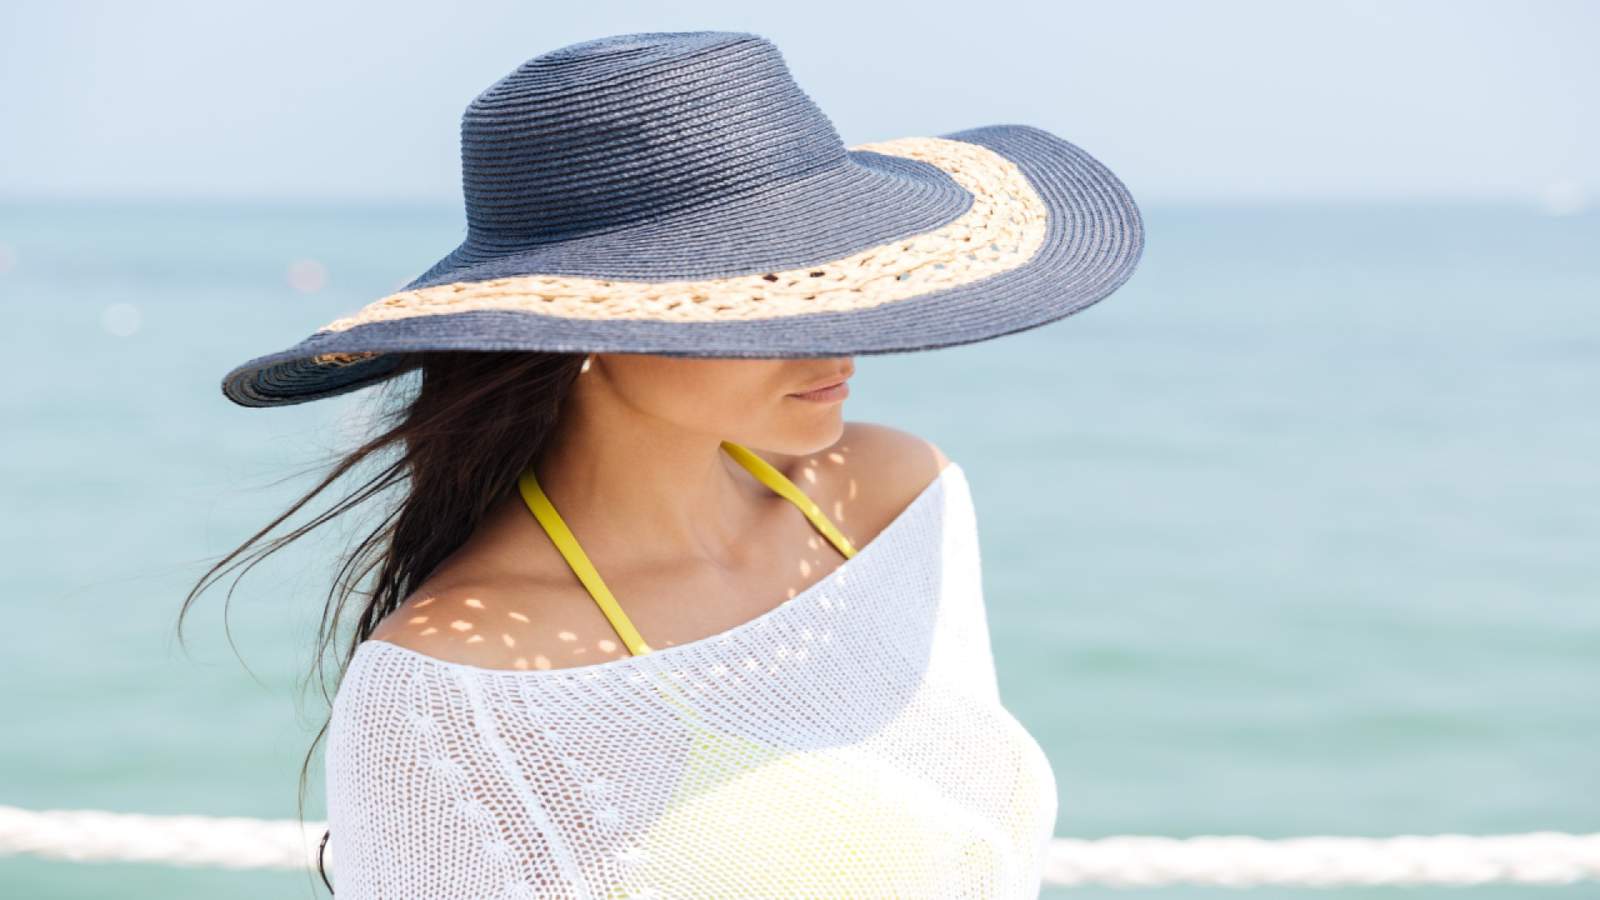 4 beauty tips to consider during the heat of summer